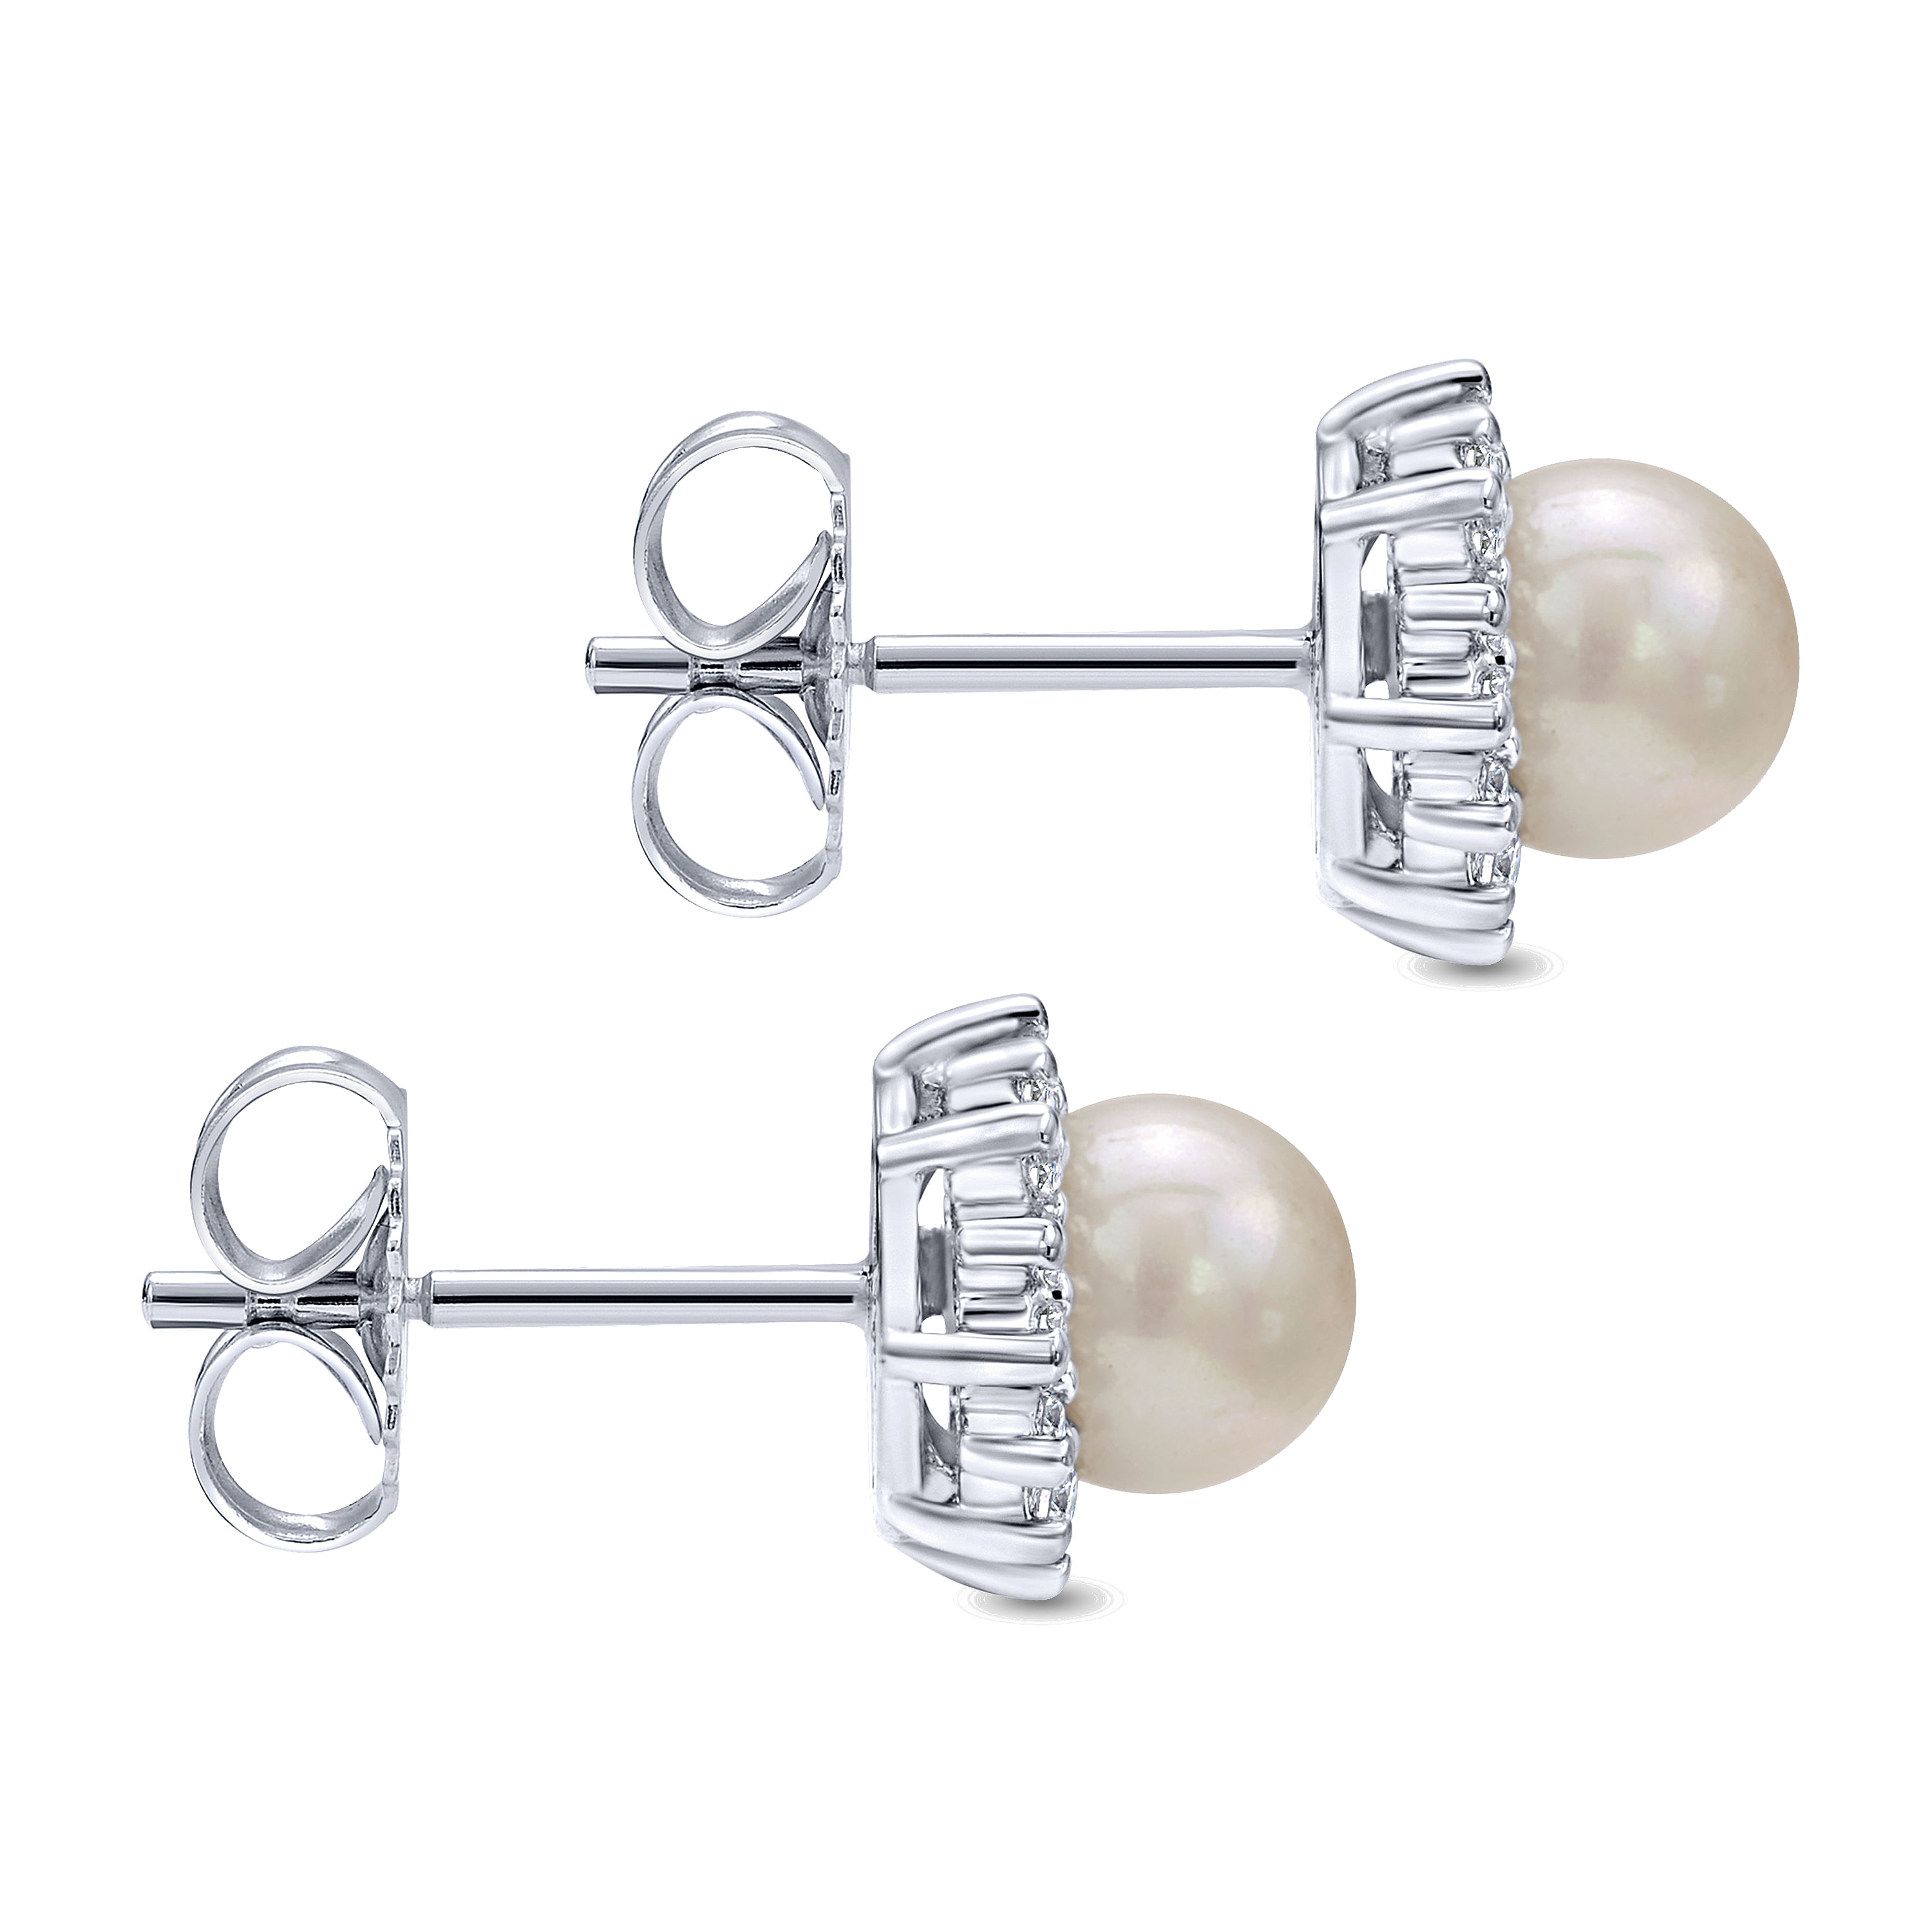 14K White Gold Pearl with Diamond Halo Stud Earrings